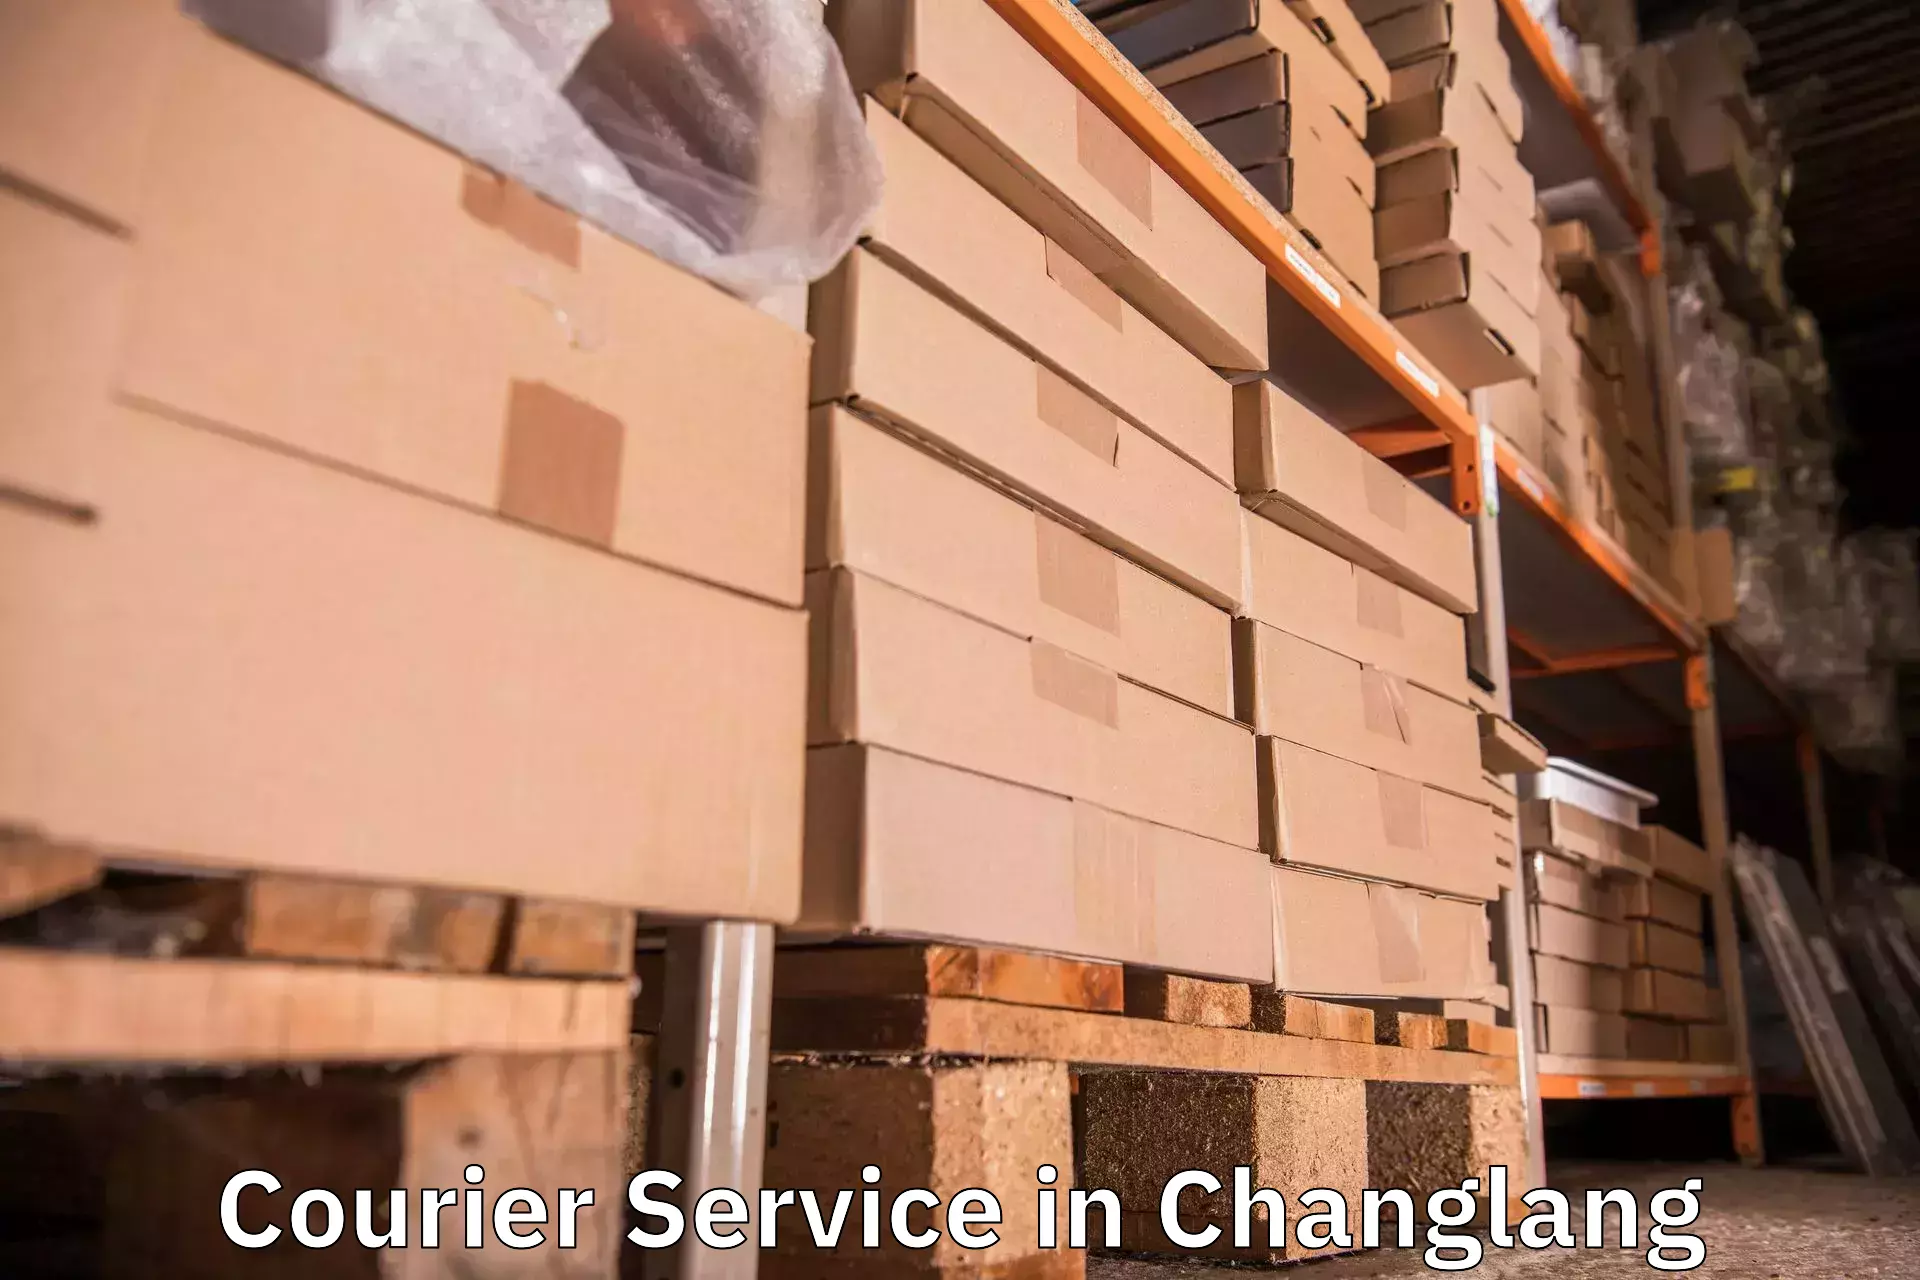 Business delivery service in Changlang